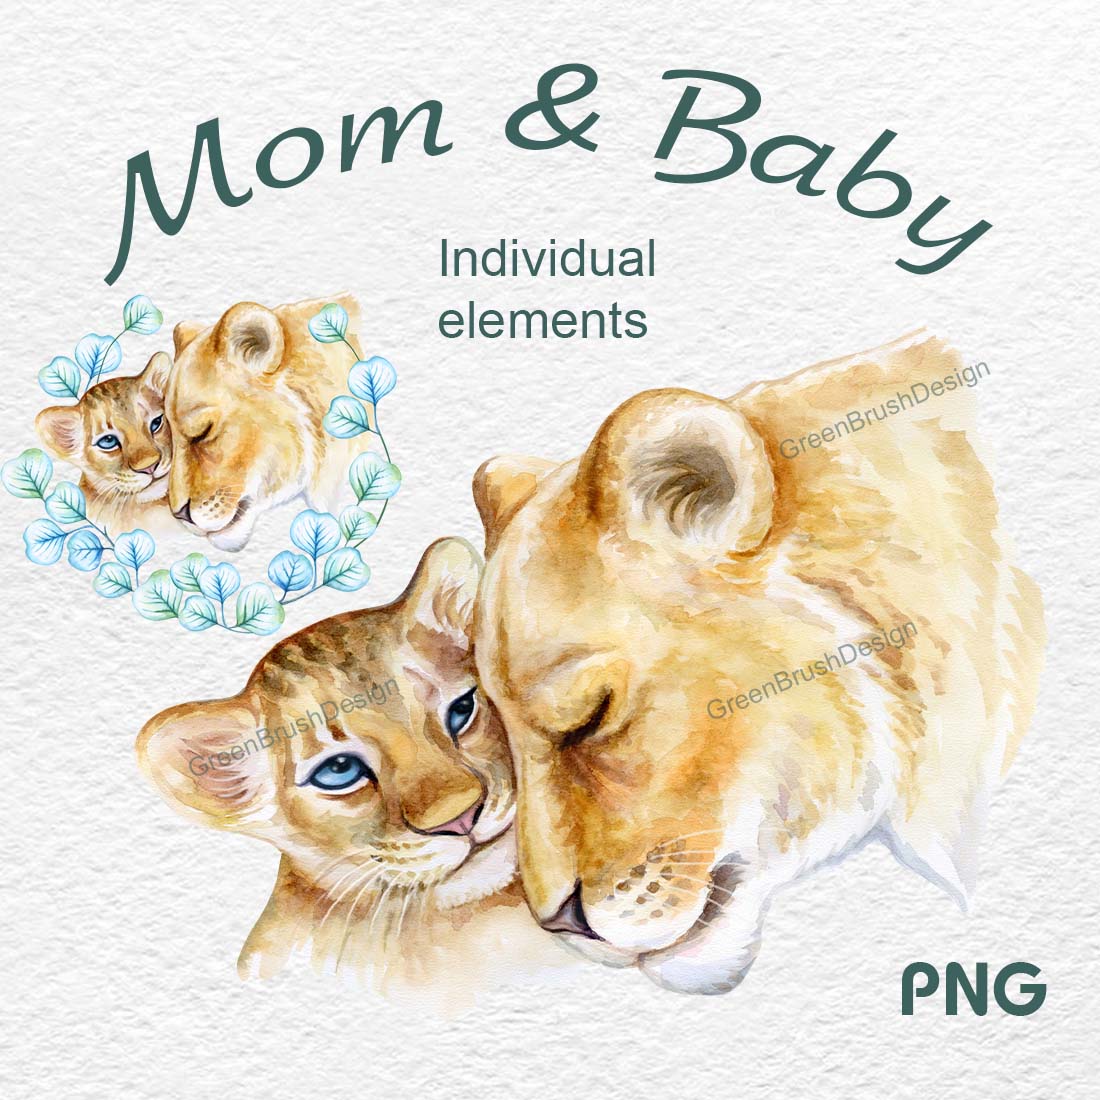 Lion Mum and Baby, Little Lion Watercolor, Safari Animal PNG cover image.